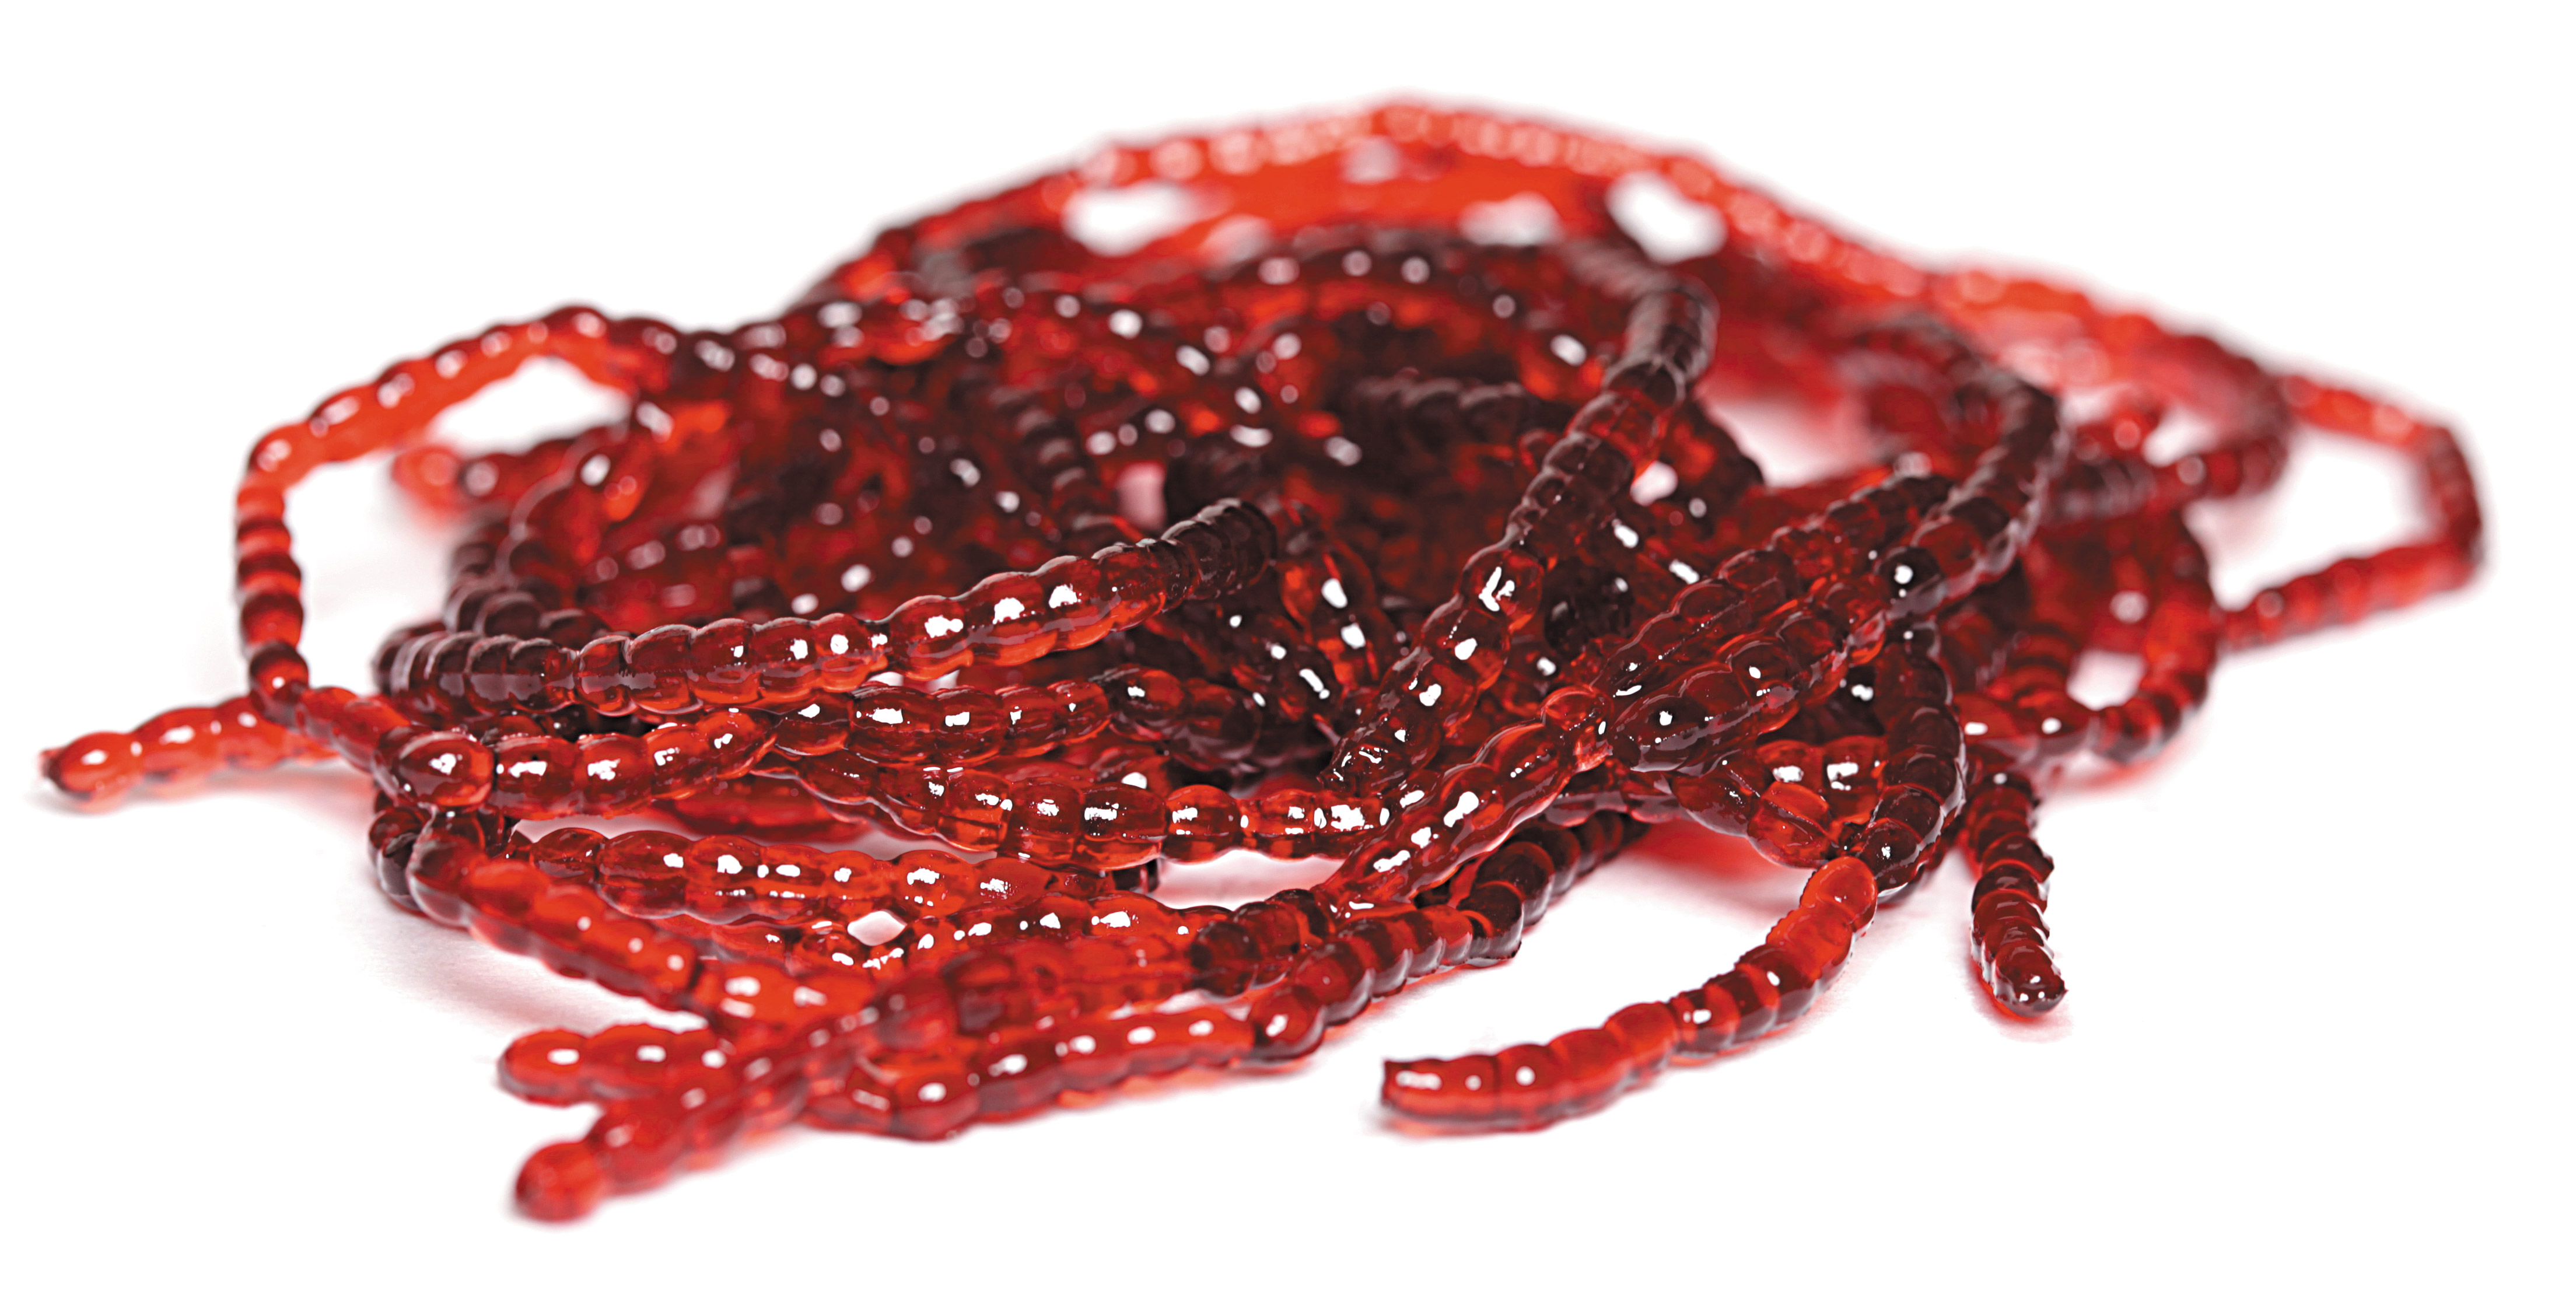 Bloodworm Soft Plastic Lure Fishing Worm Bait Red Blood Bloodworms Whiting  Bream